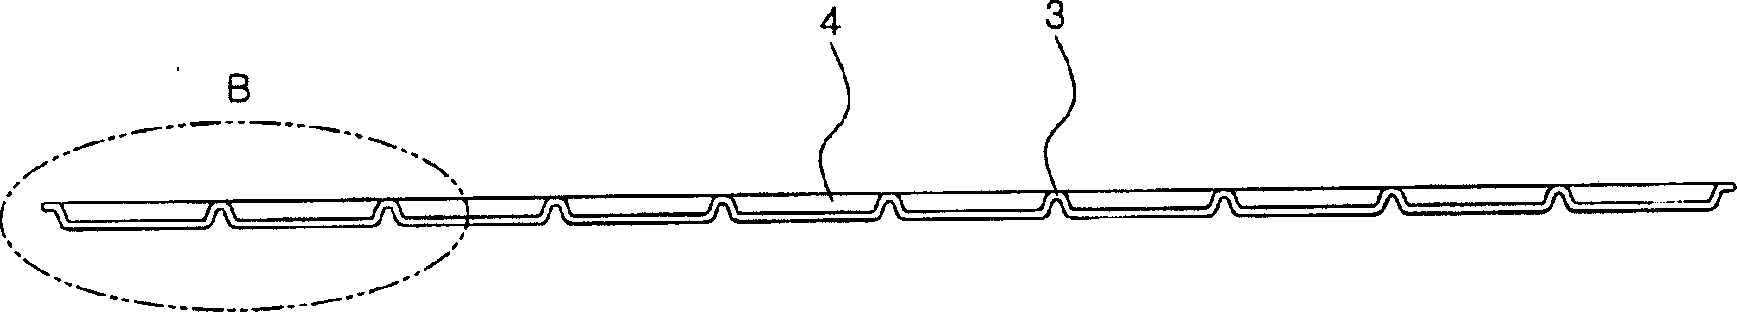 Channel structure of flat fluorescent lamp